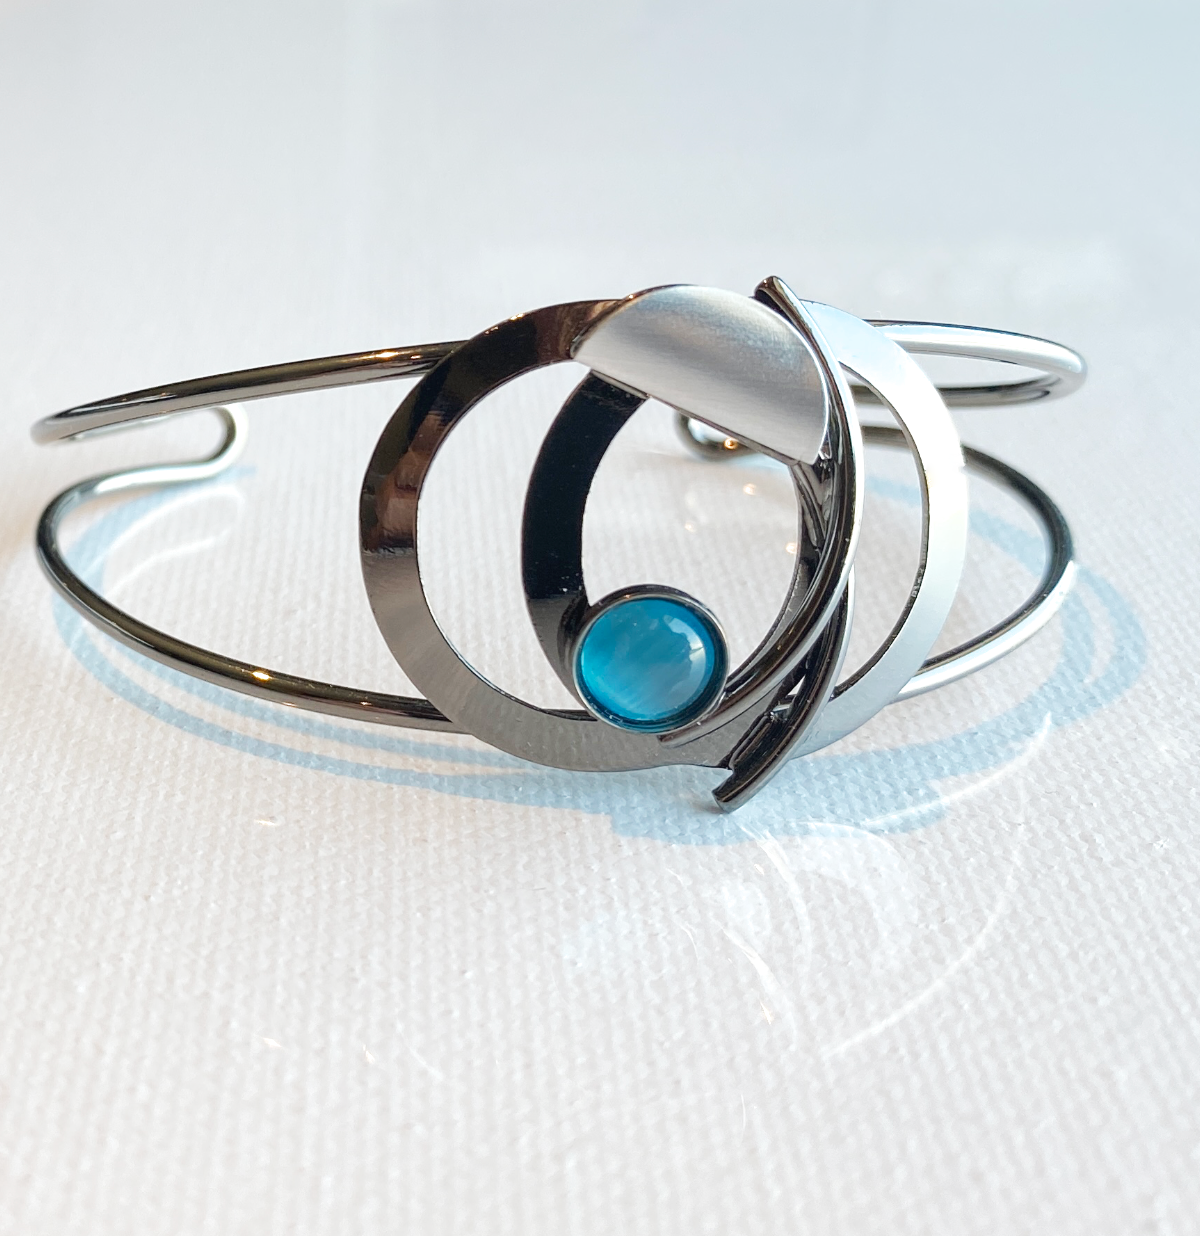 Christophe Poly Cuffs -small- Turquoise with Black Loops - Brainchild Designs